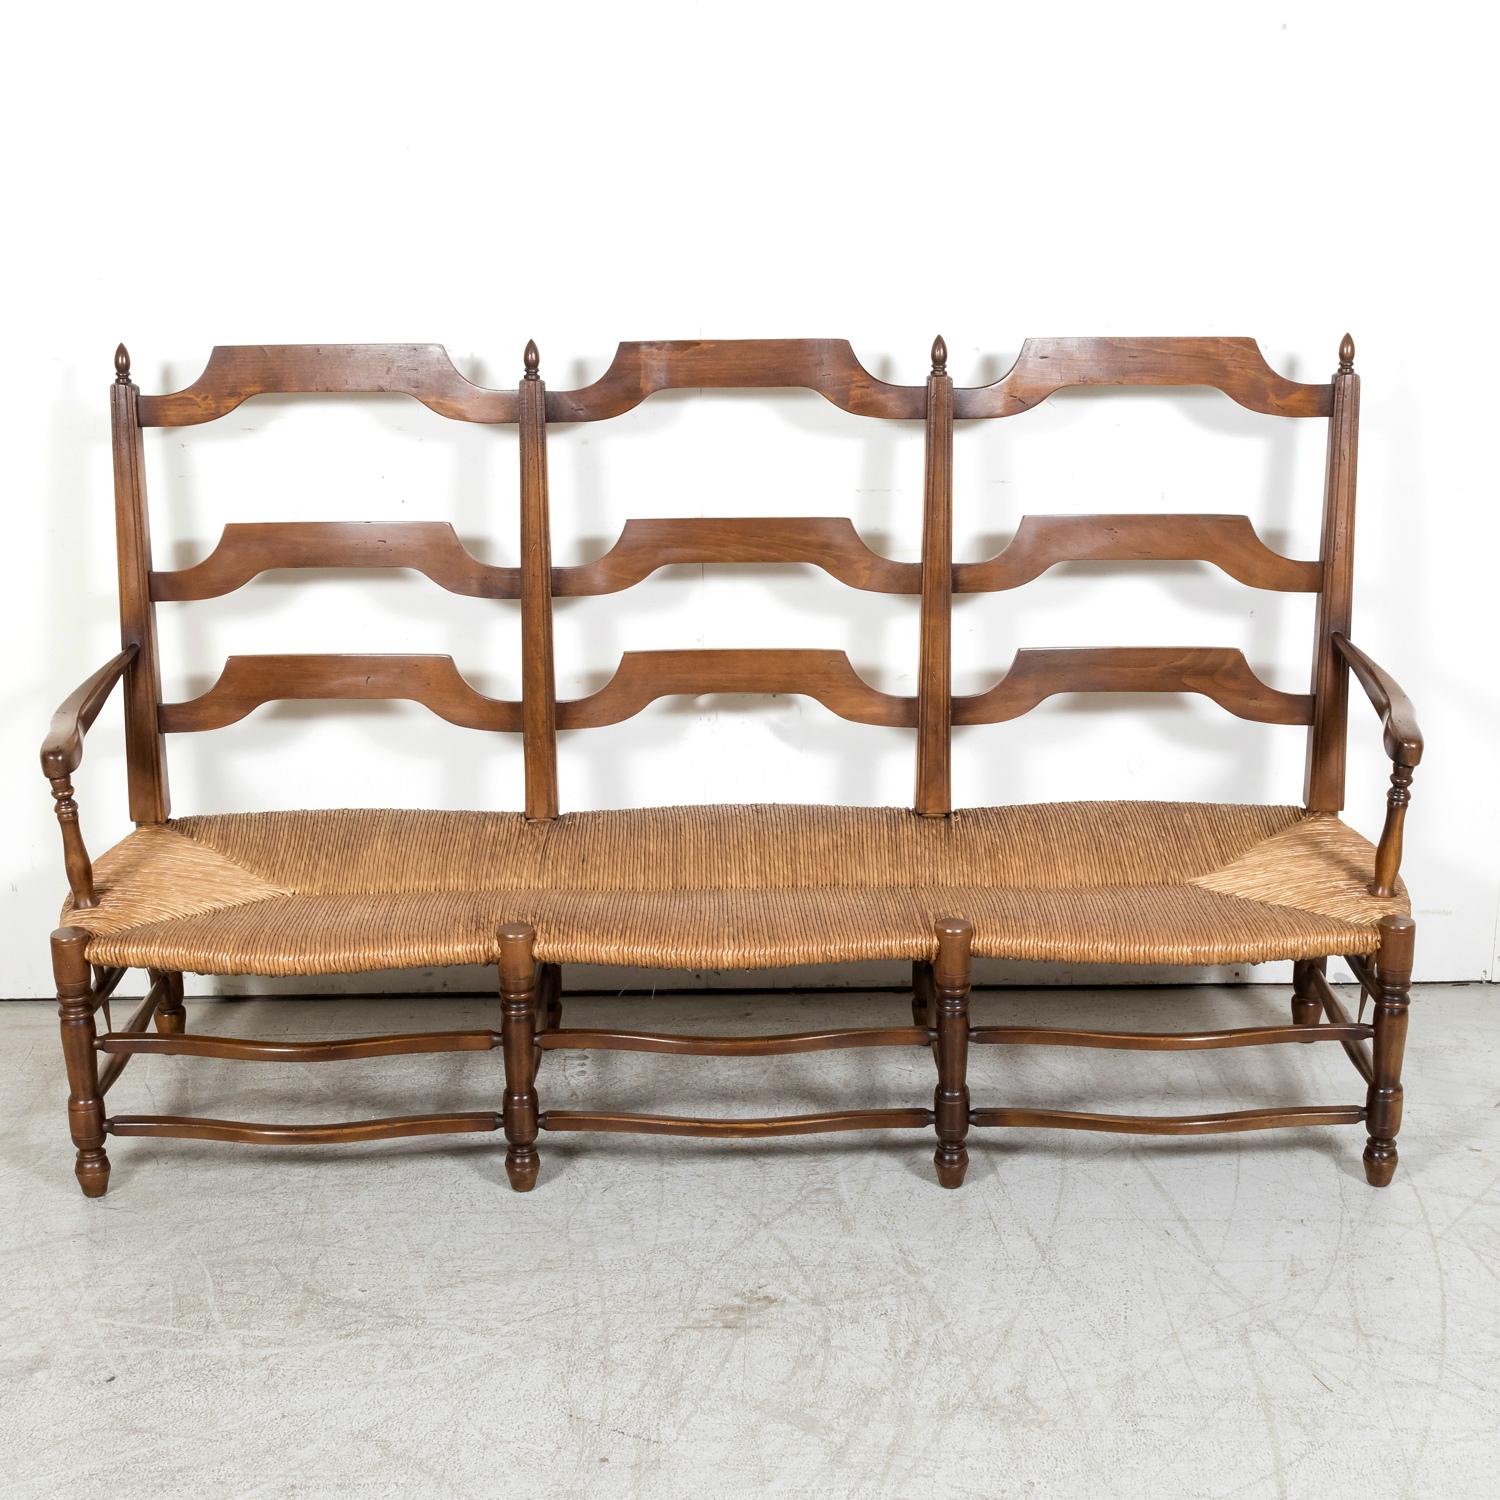 A handsome Country French settee or radassier handcrafted of walnut near Bayeux, a medieval town on the Aure river in the Normandy region of northwestern France, circa 1890s. Featuring a ladder-back design and handwoven rush seat that seats three,